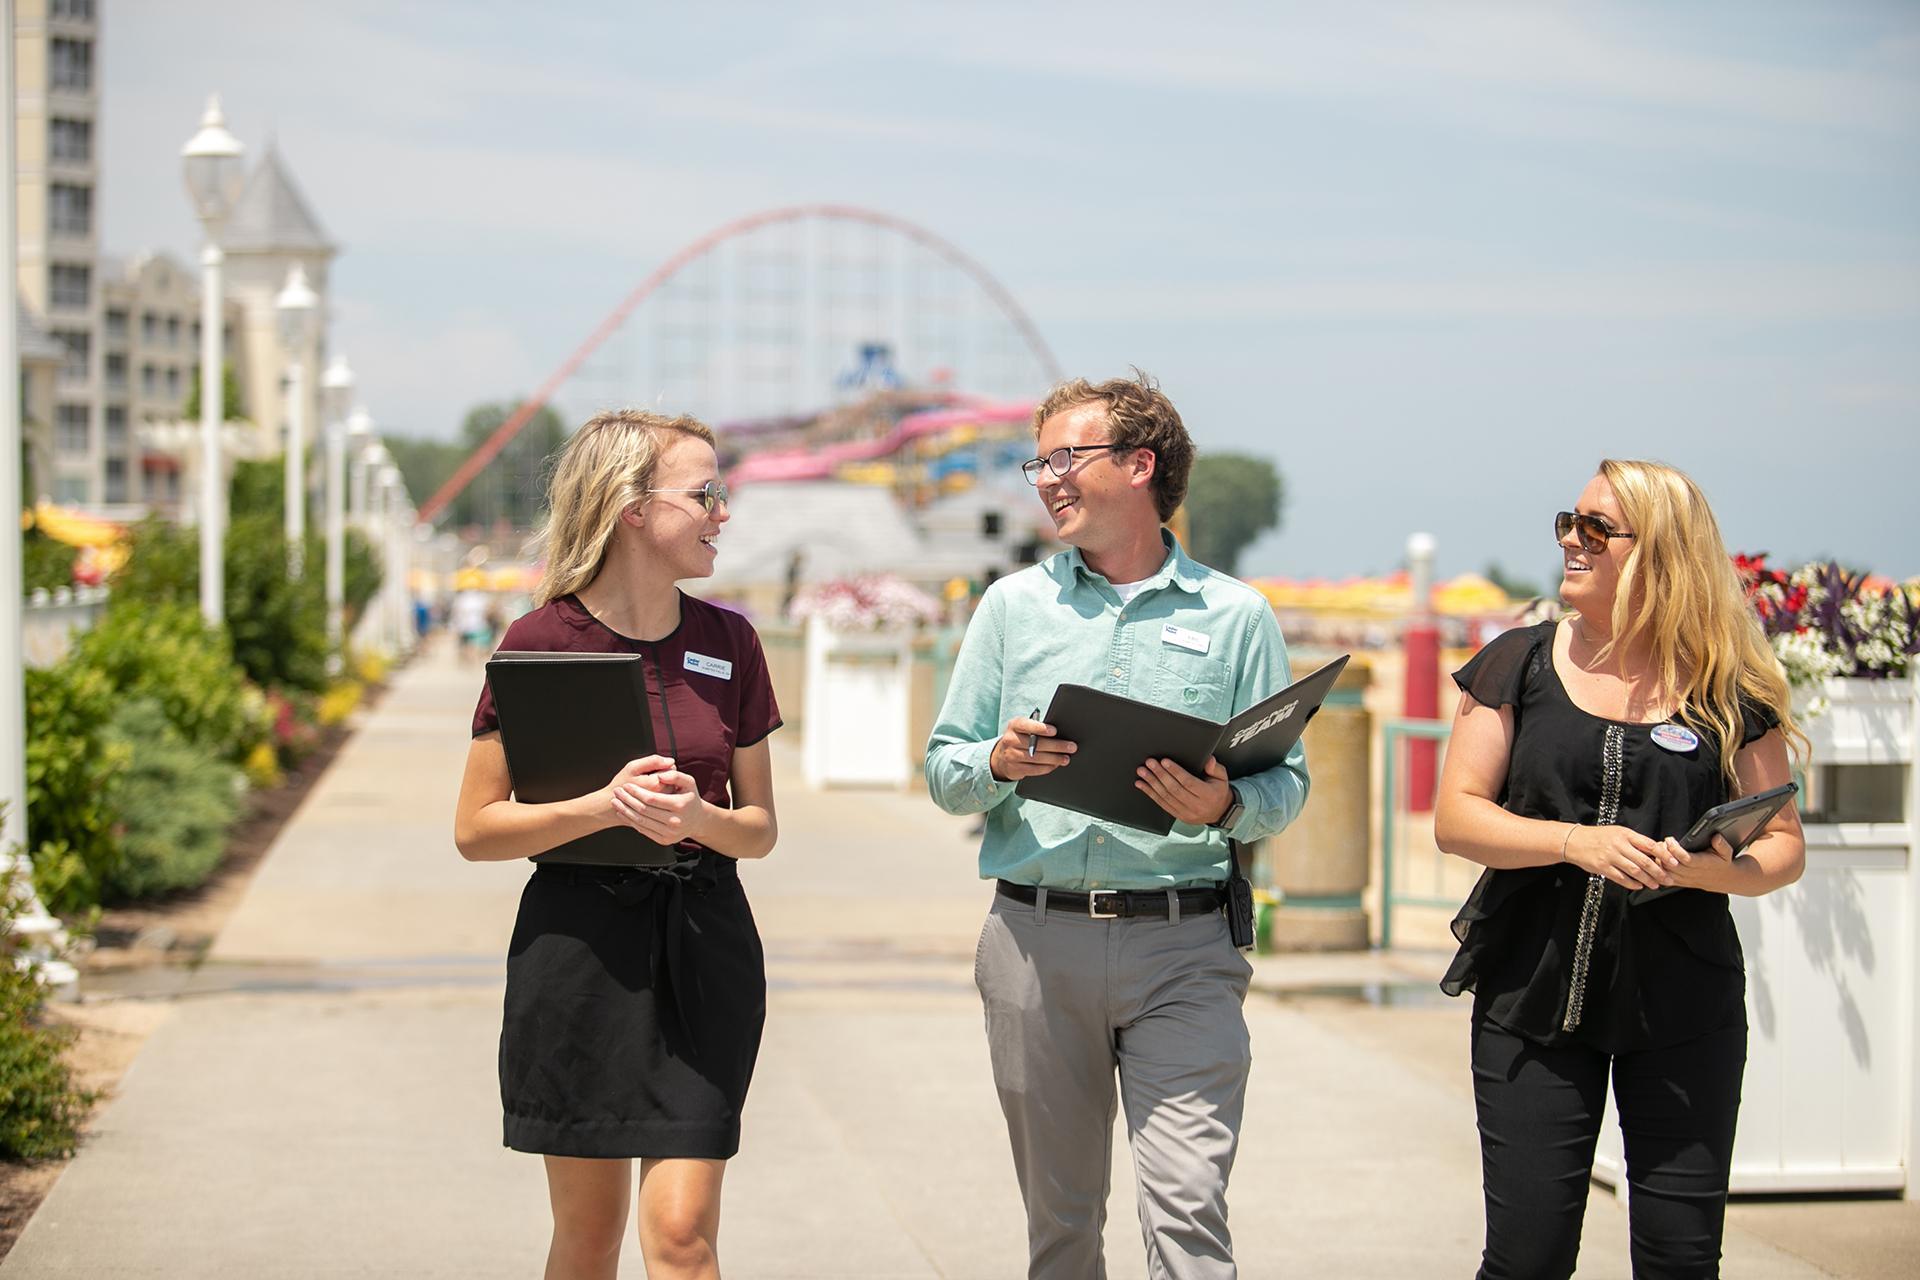 BGSU resort and attraction management students walk through the Cedar Point resort and theme park on a sunny day.